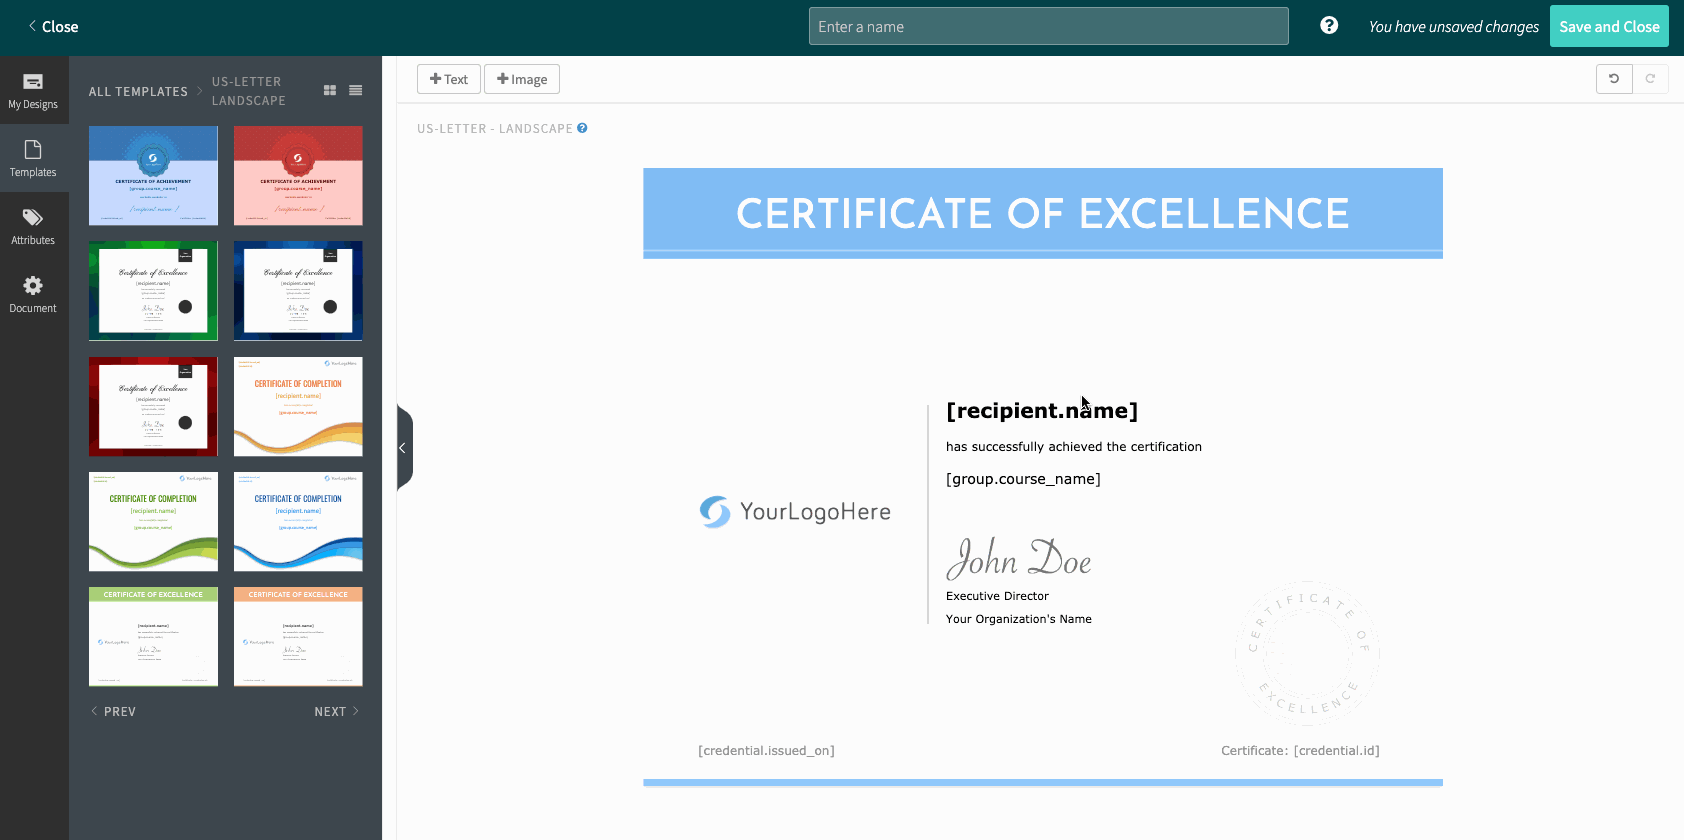 Accredible certificate maker as the one with more customization options than Credly.